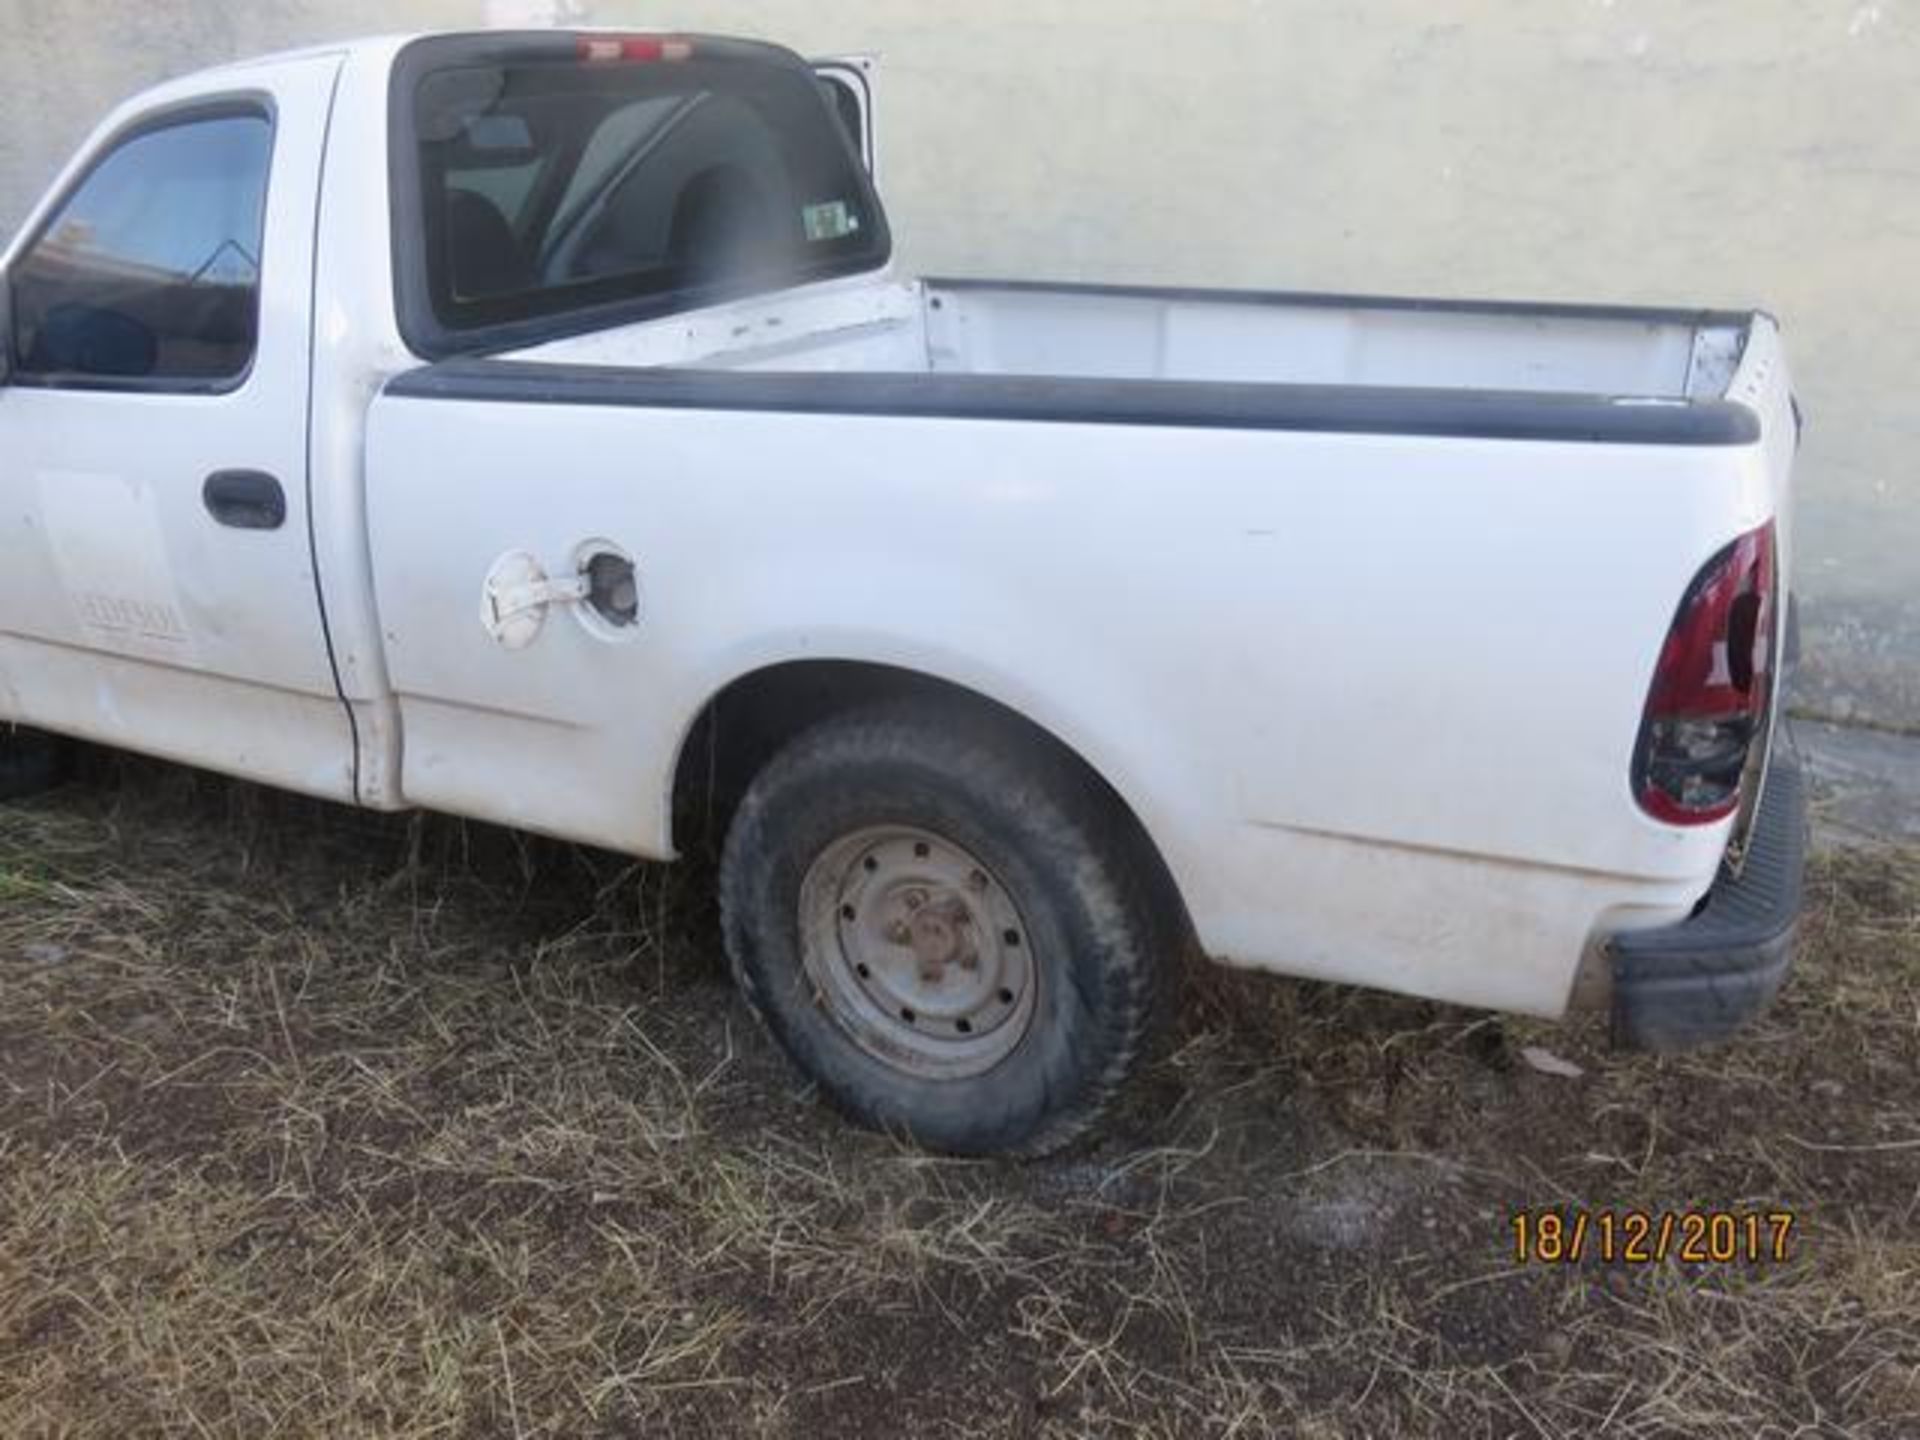 Vehiculo Marca Ford, Linea F-150, Tipo Pick Up, Modelo 2008., Located In: Durango, Deposit Of: $ - Image 17 of 18